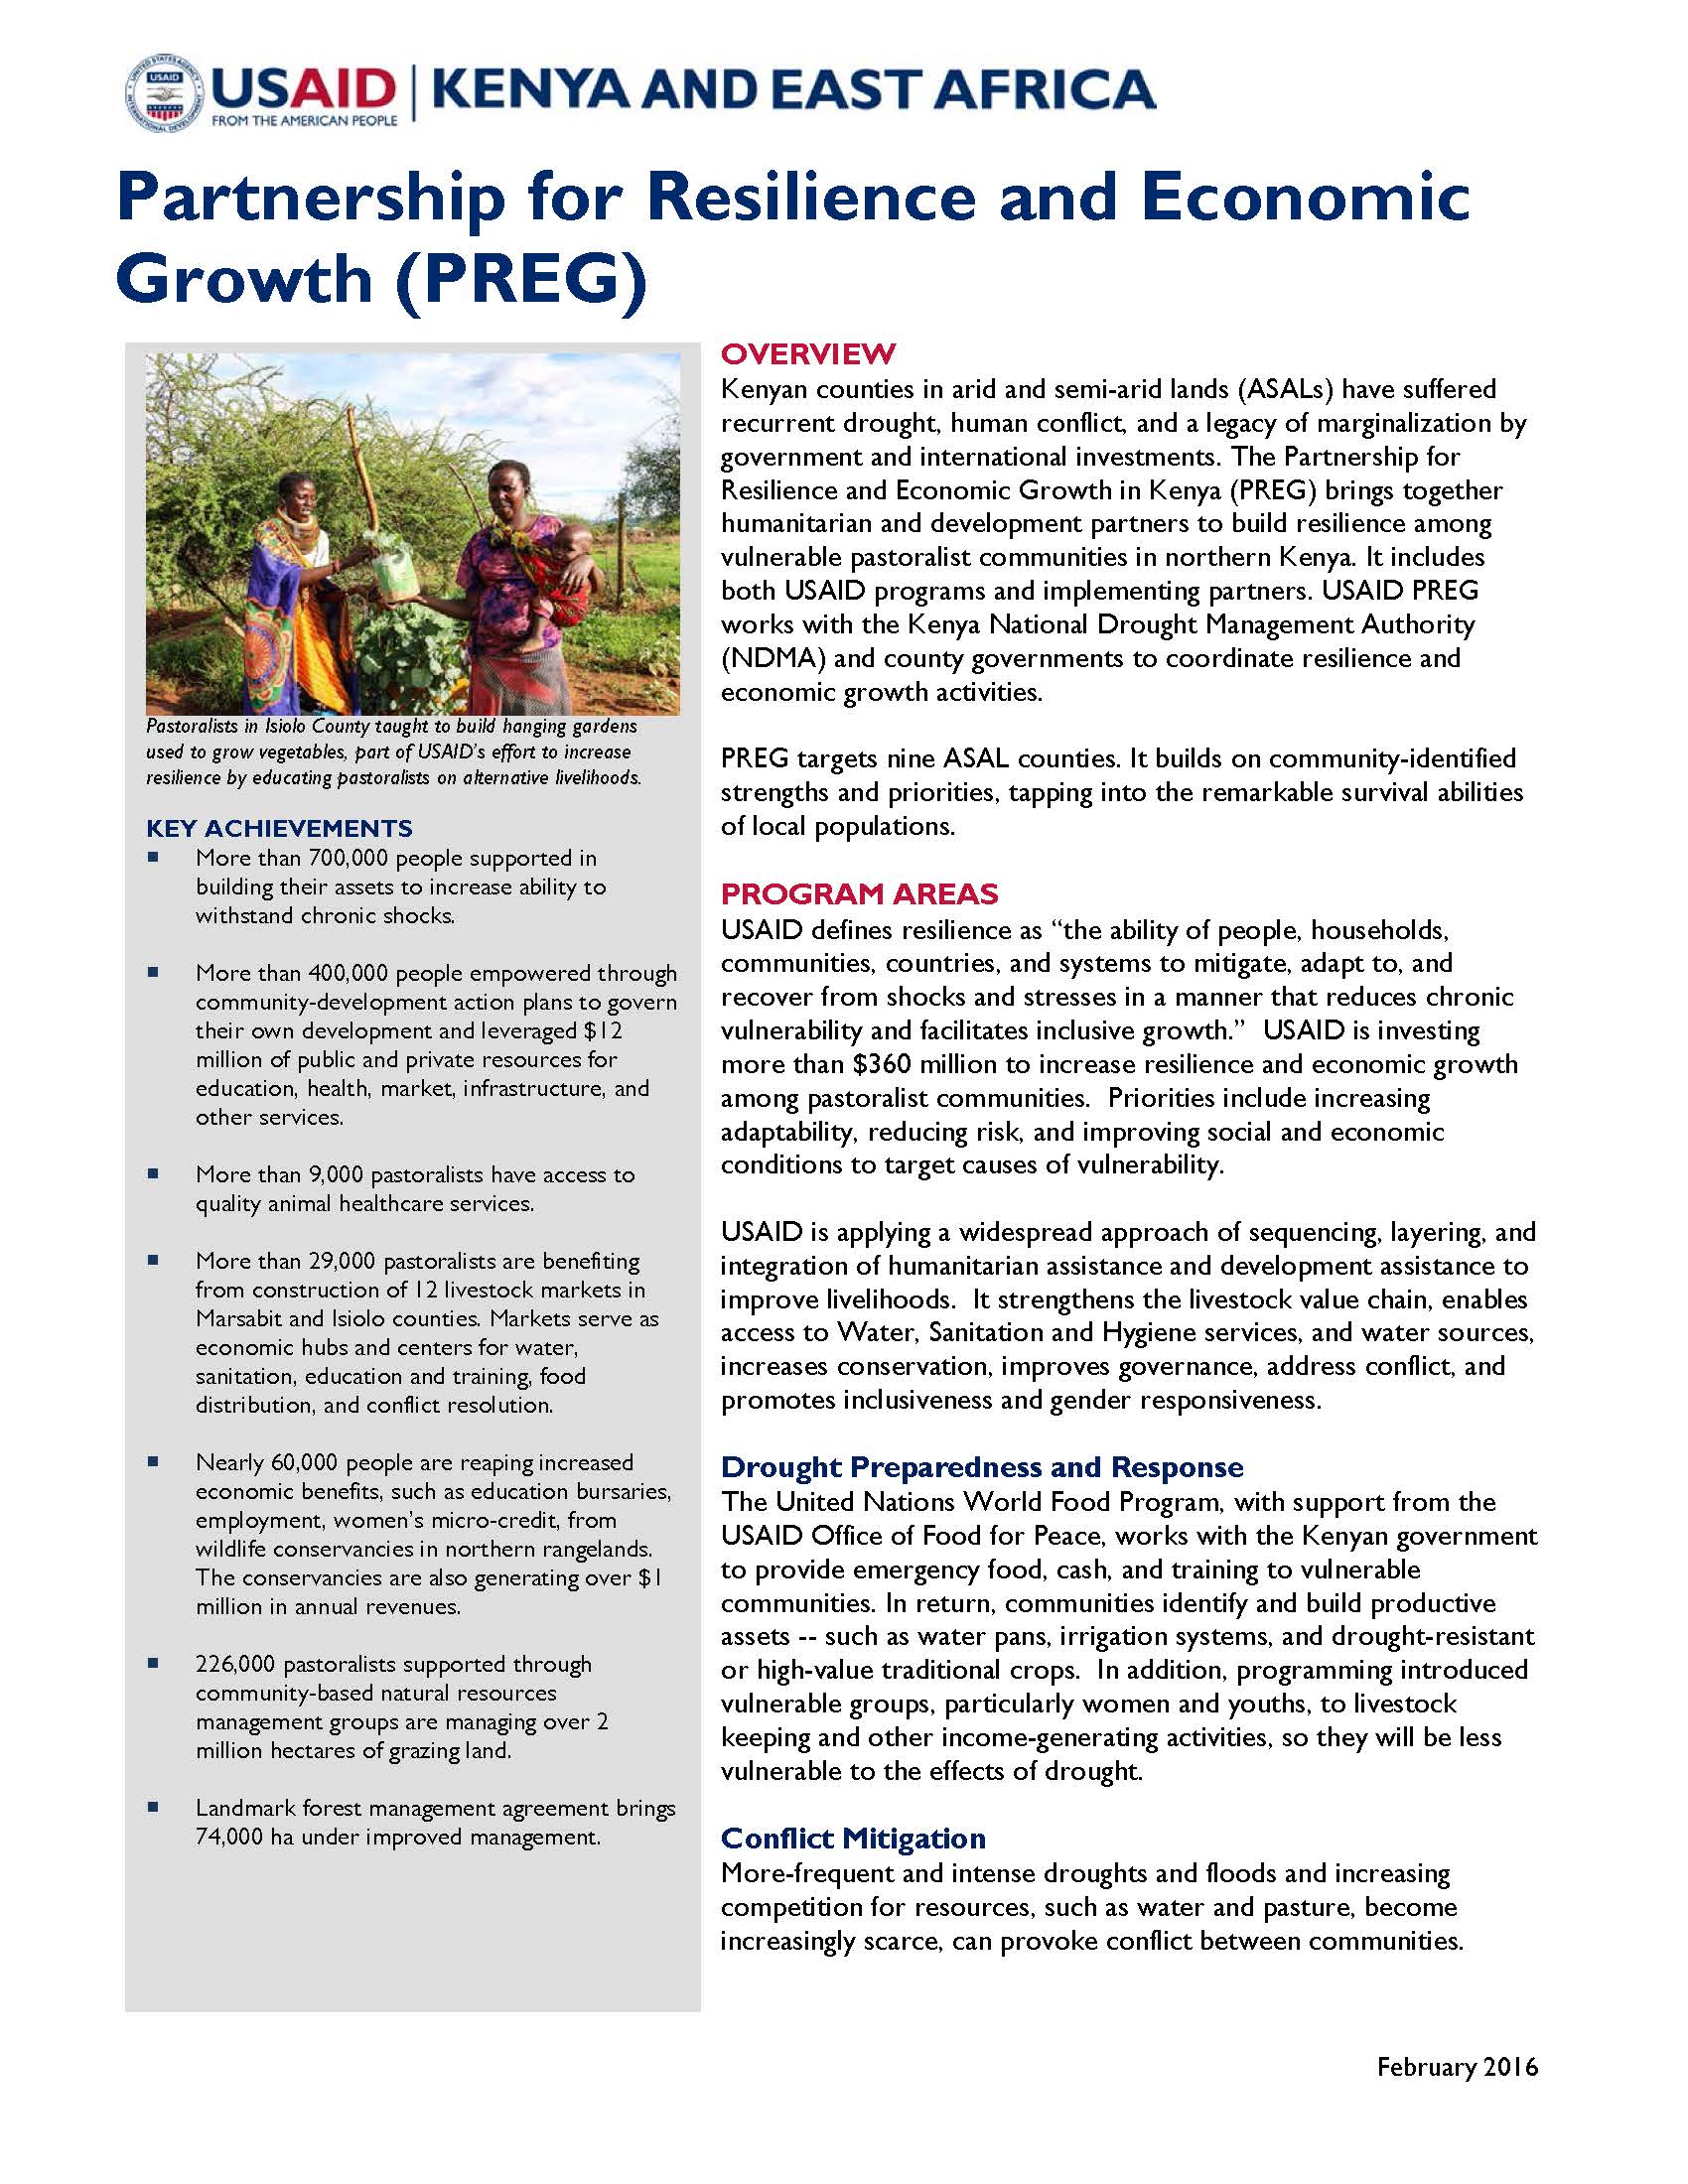 Partnership for Resilience and Economic Growth (PREG)